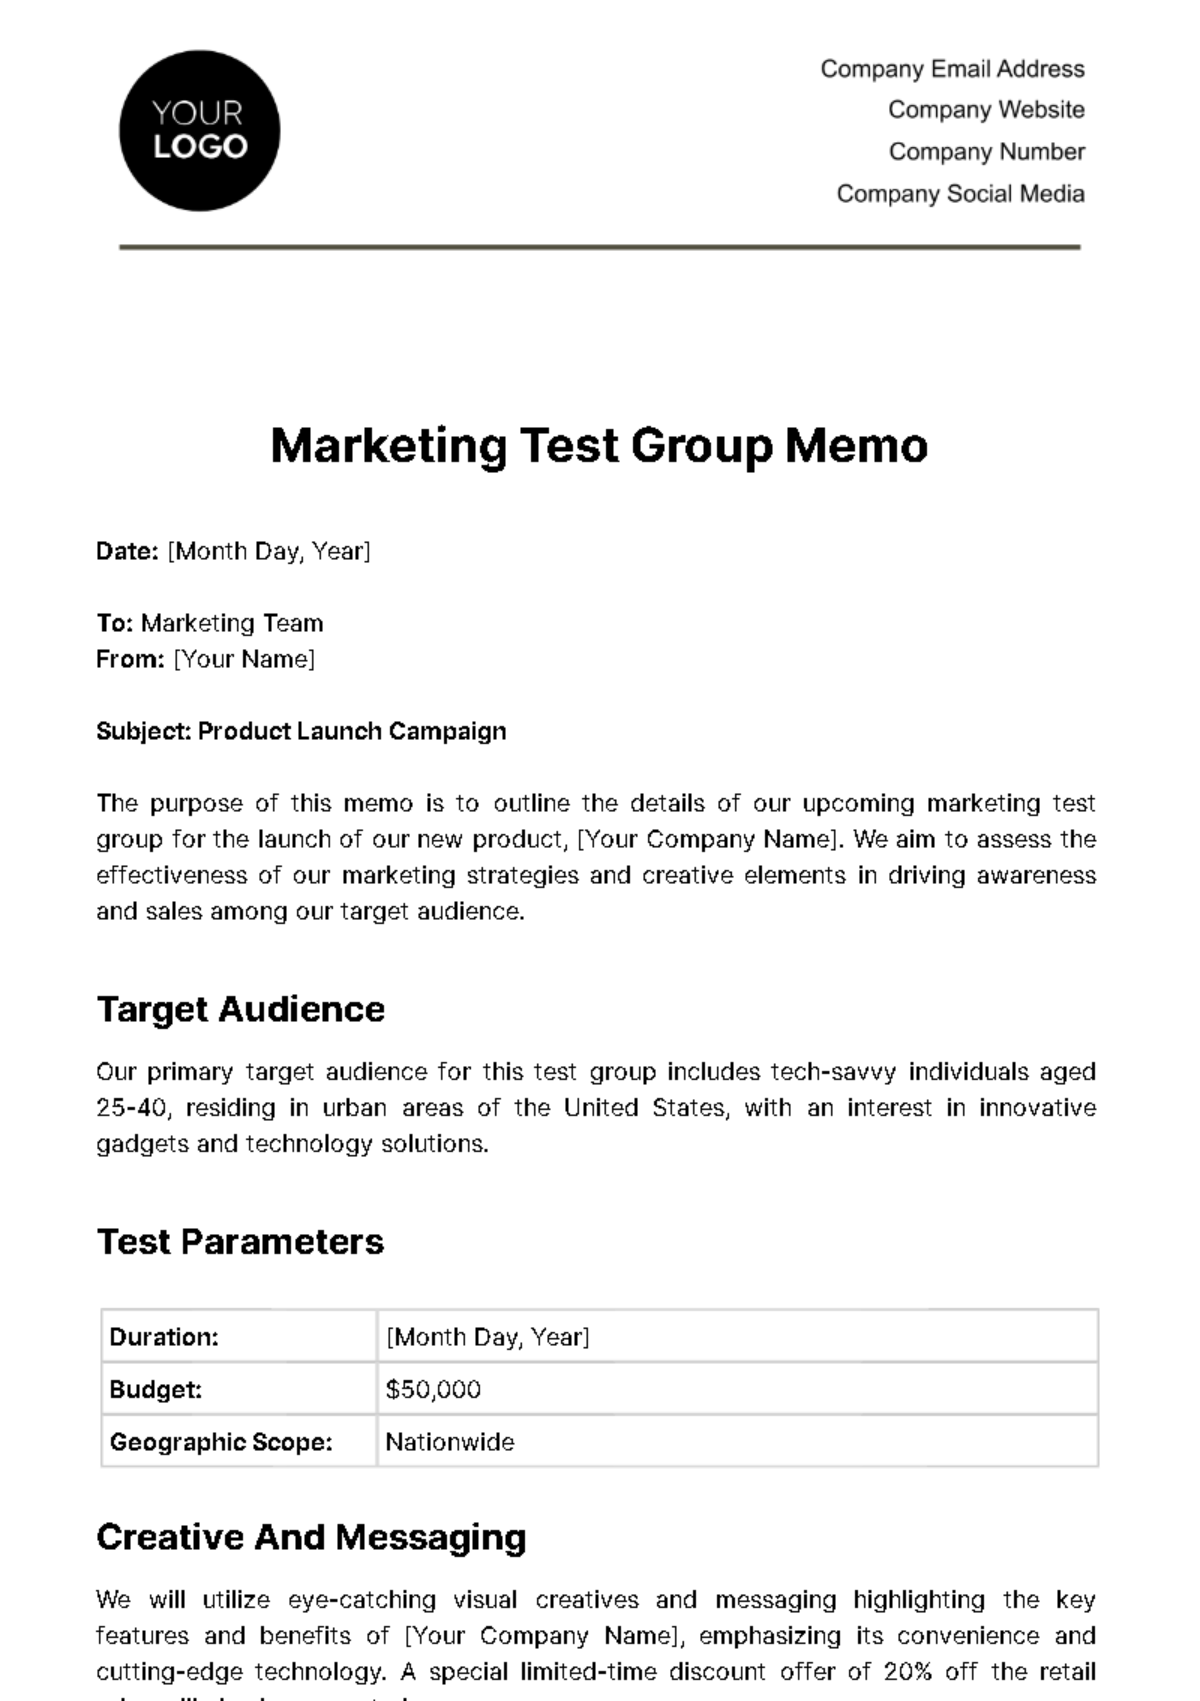 Marketing Test Group Memo Template